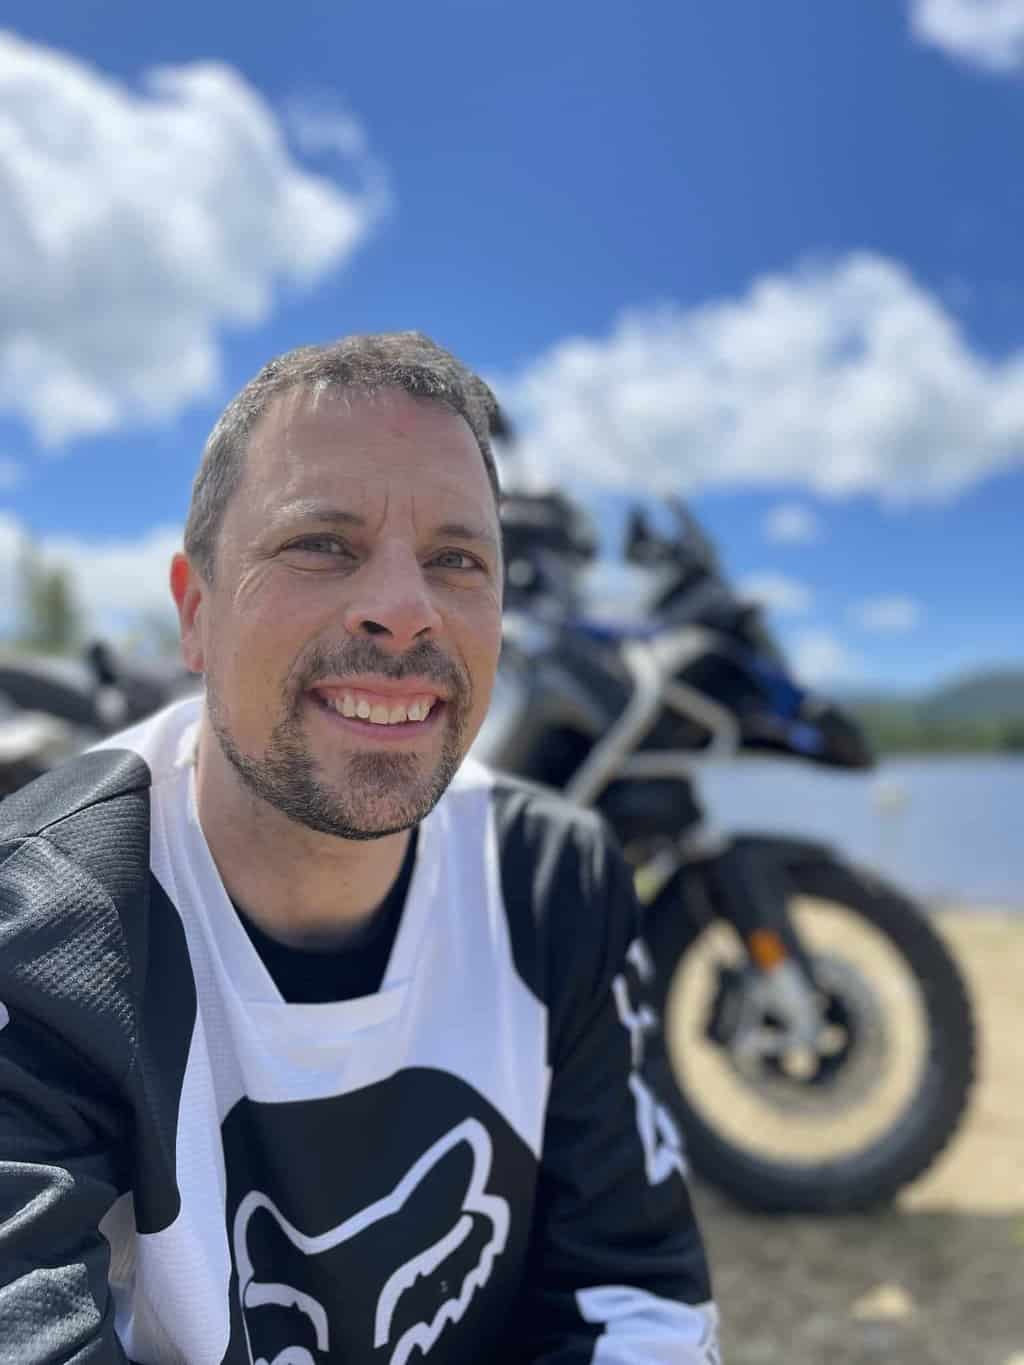 2023 BMW R 1250 GS: Upgrades and Improvements